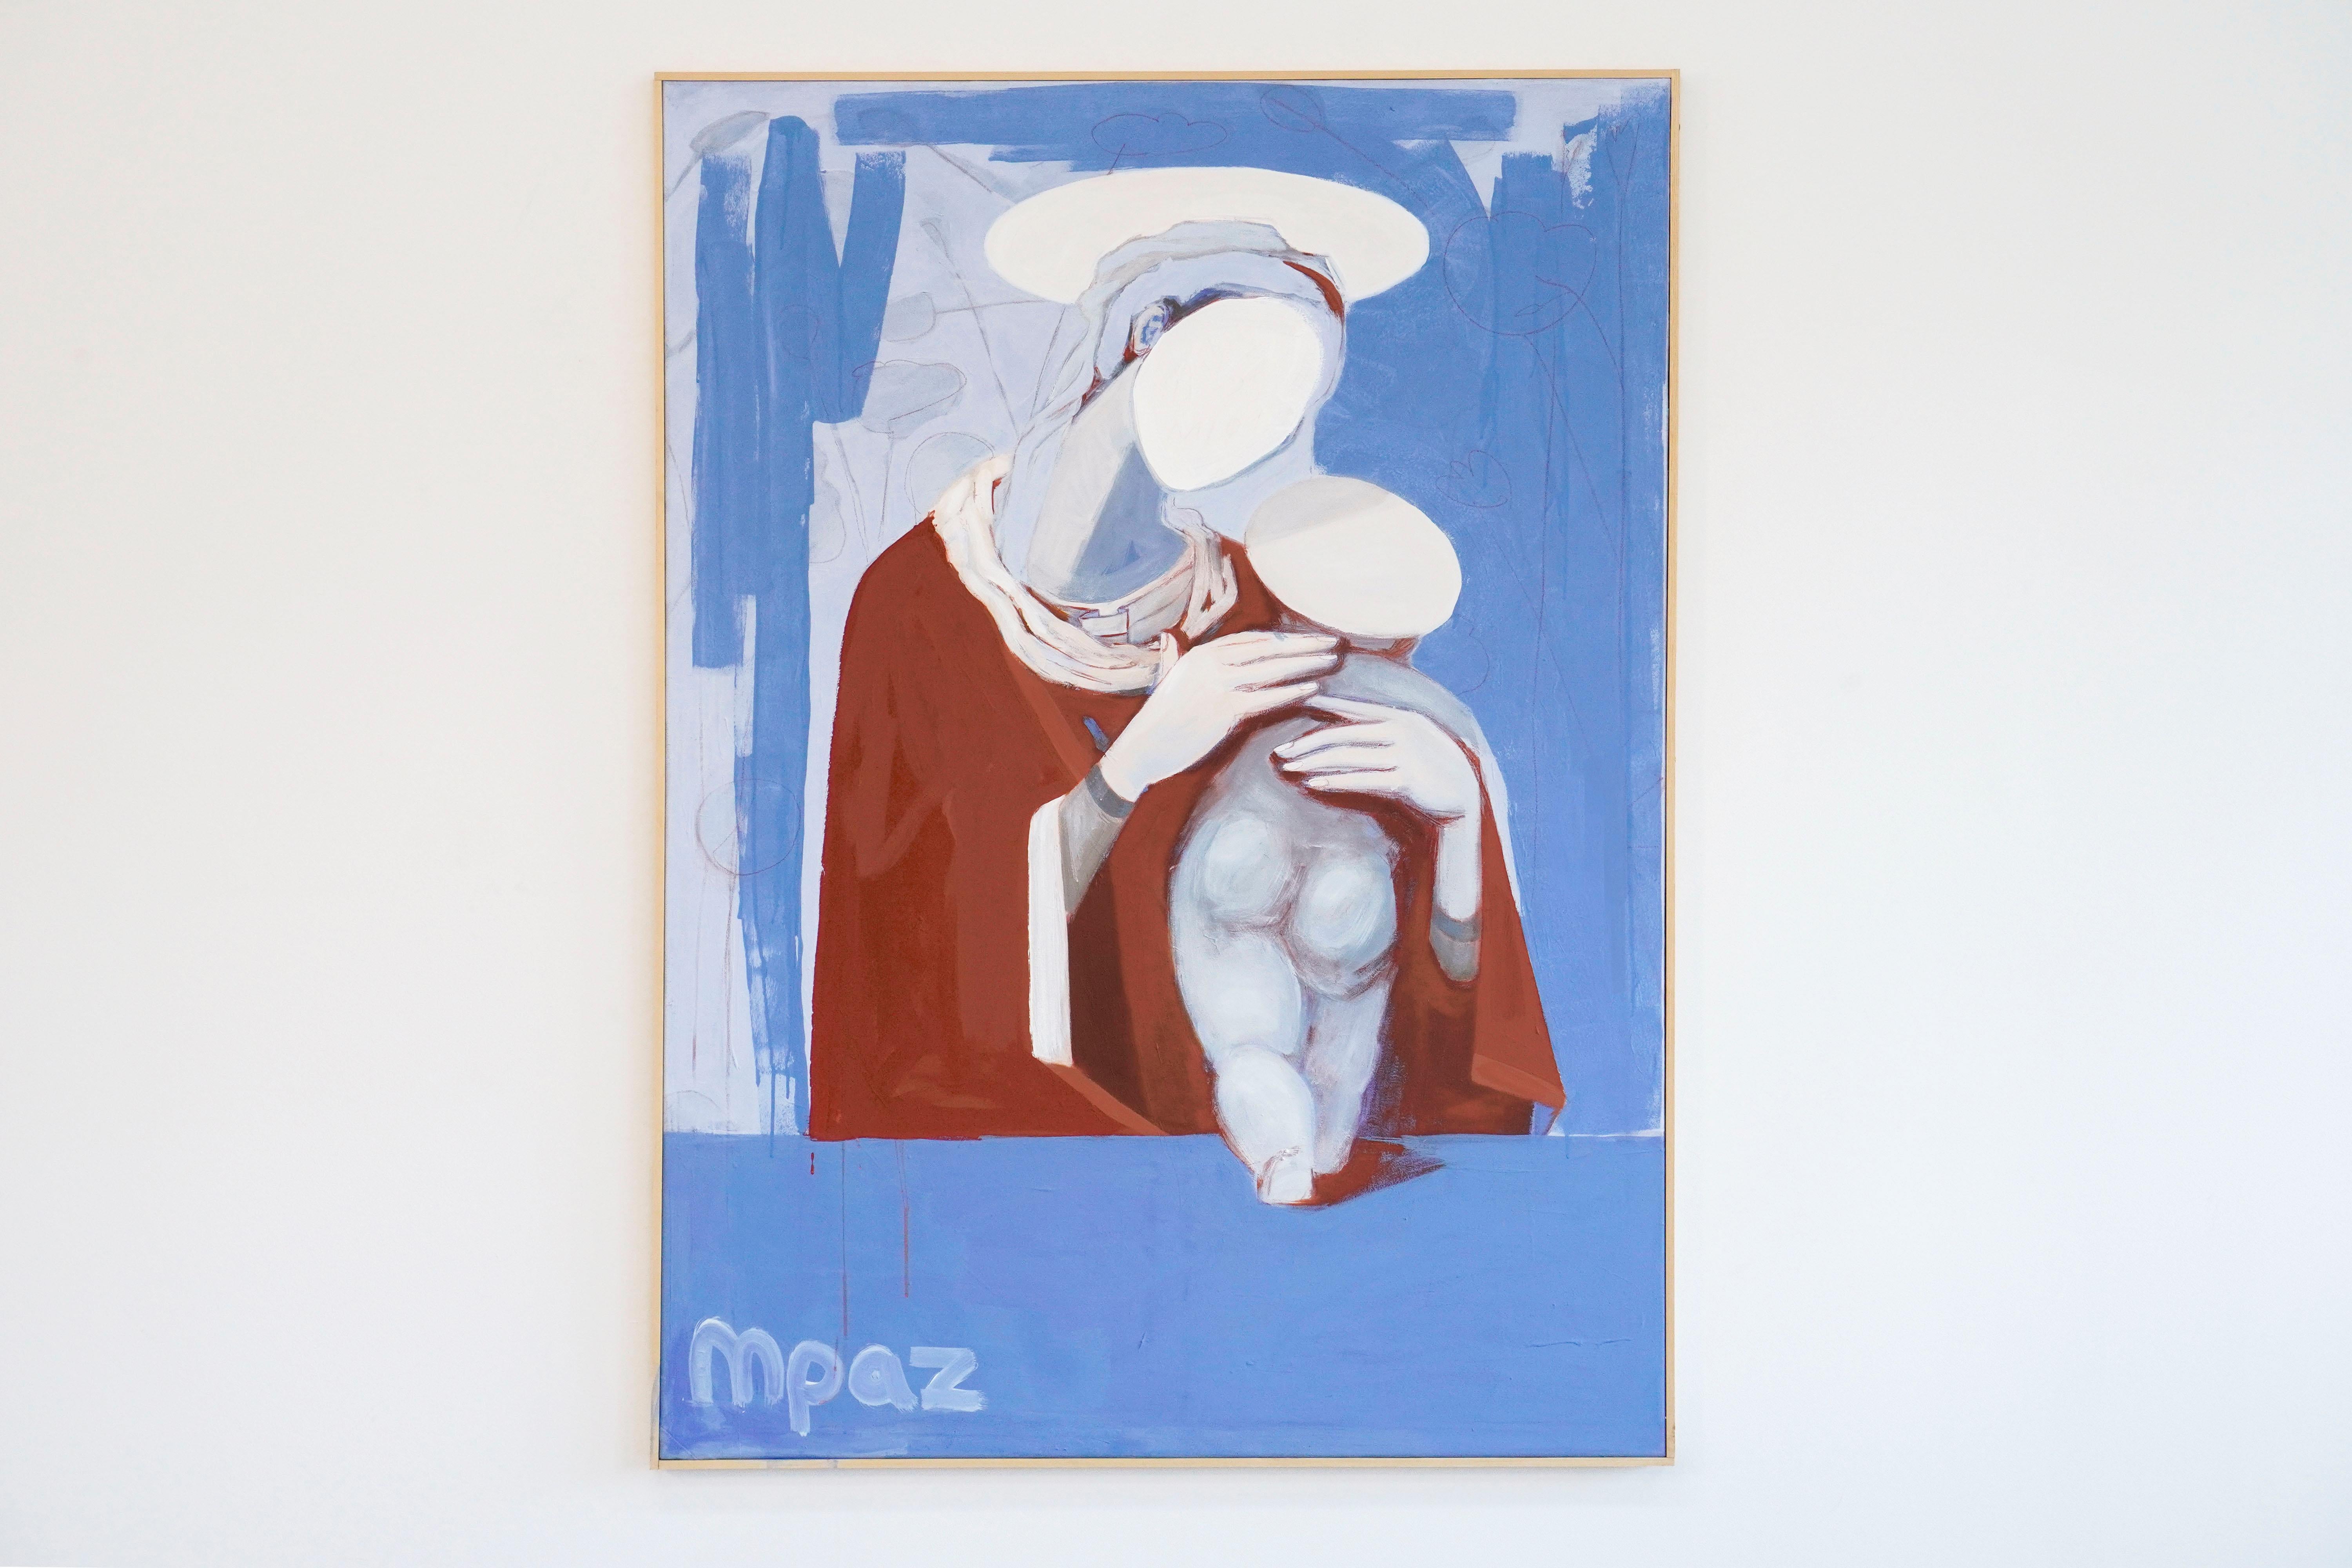 Magdalena Paz was invited to be a guest exhibitor at Stephanus Kirche in Berlin, Germany.

Her artist statement on her "Madonna in the 21st century" series:

To create a new icon of what the ideal woman and mother of the 21st century looks like